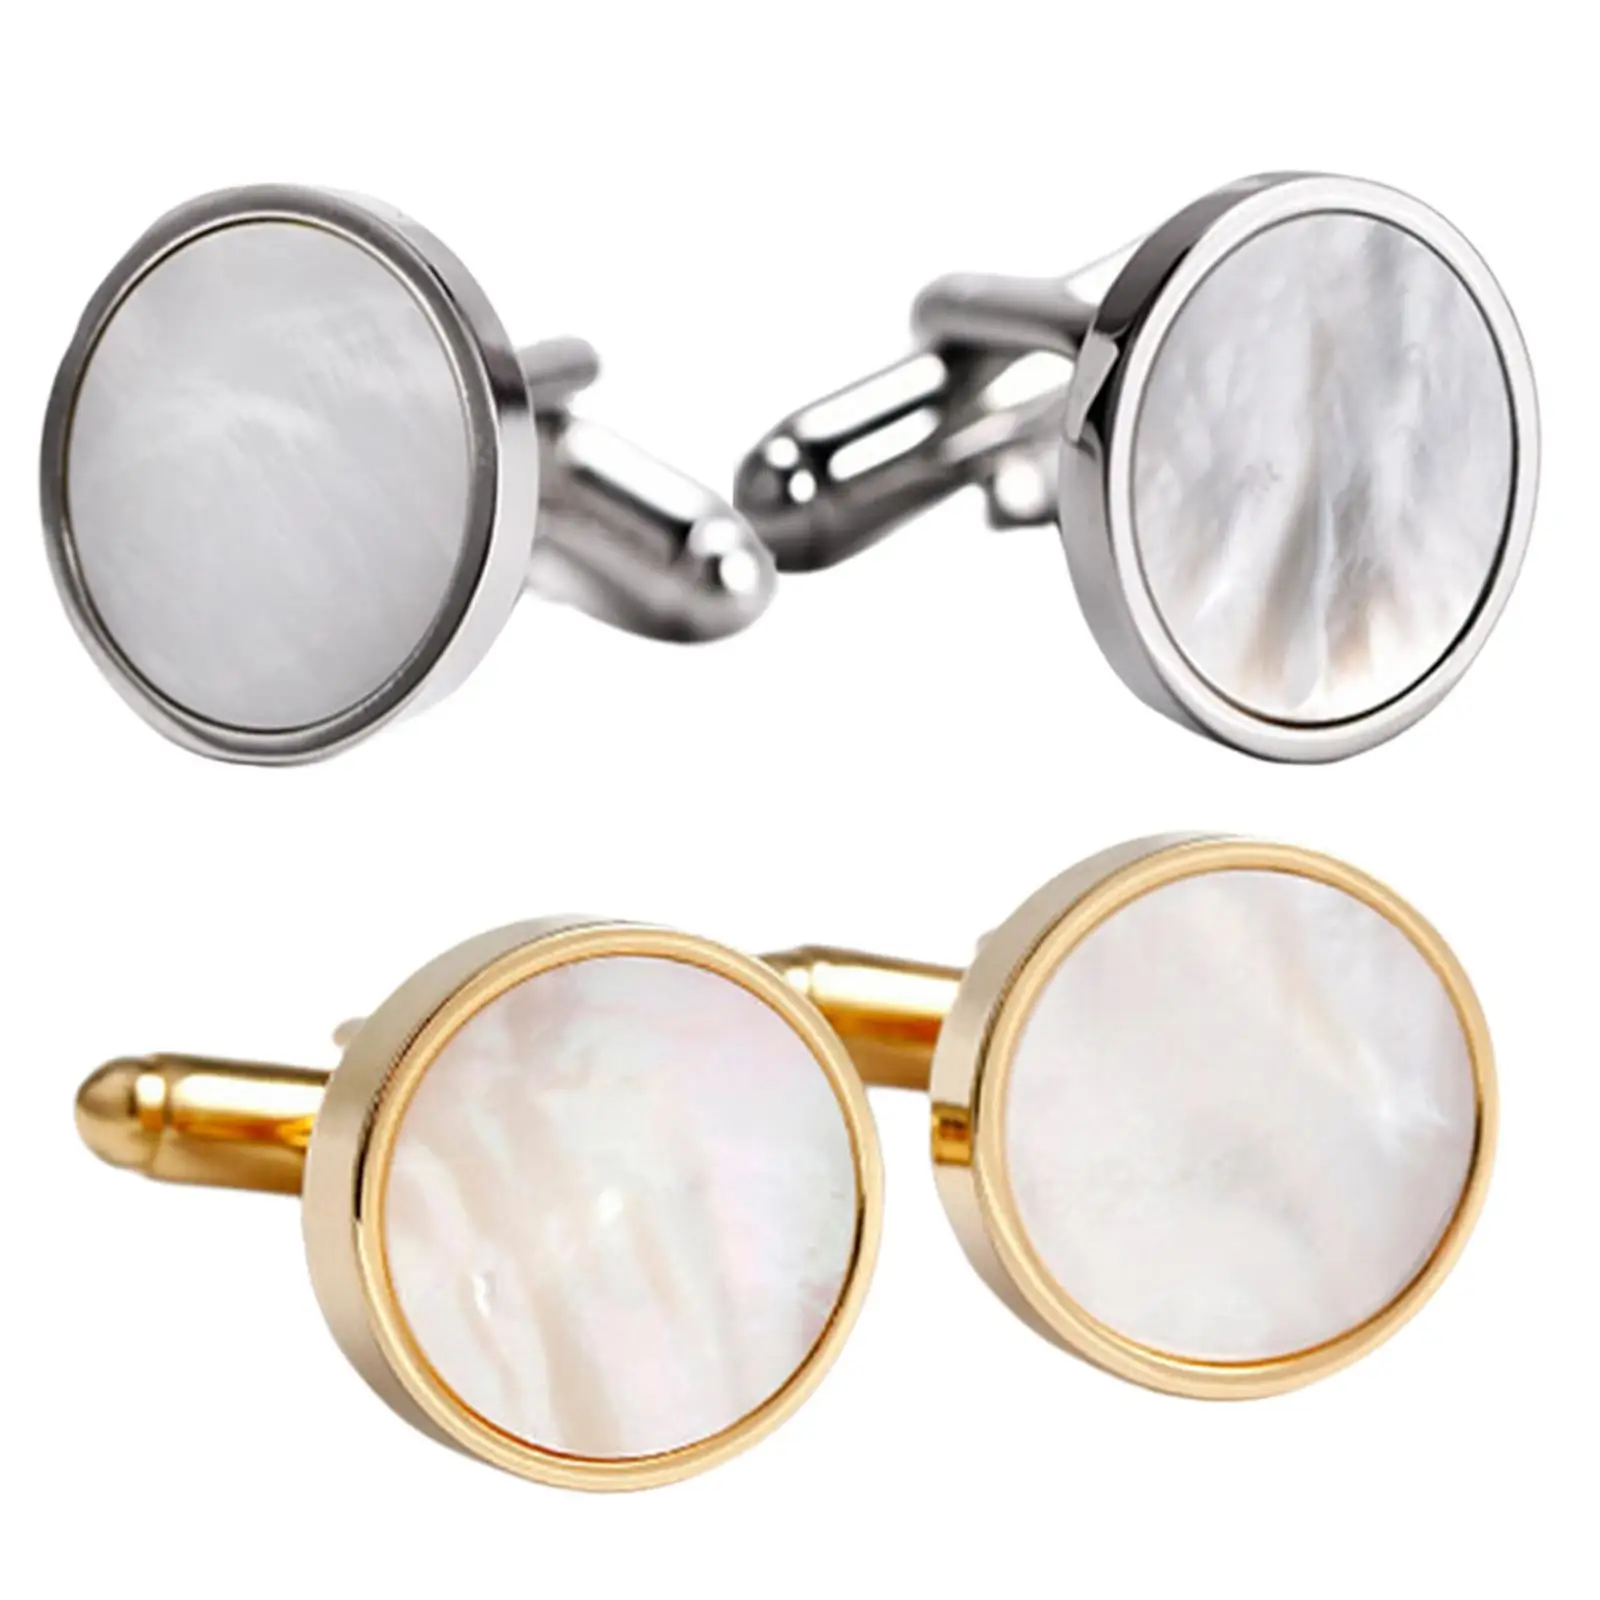 Mens Cufflinks Suit Elegant Buttons Jewelry for Christmas Business Party